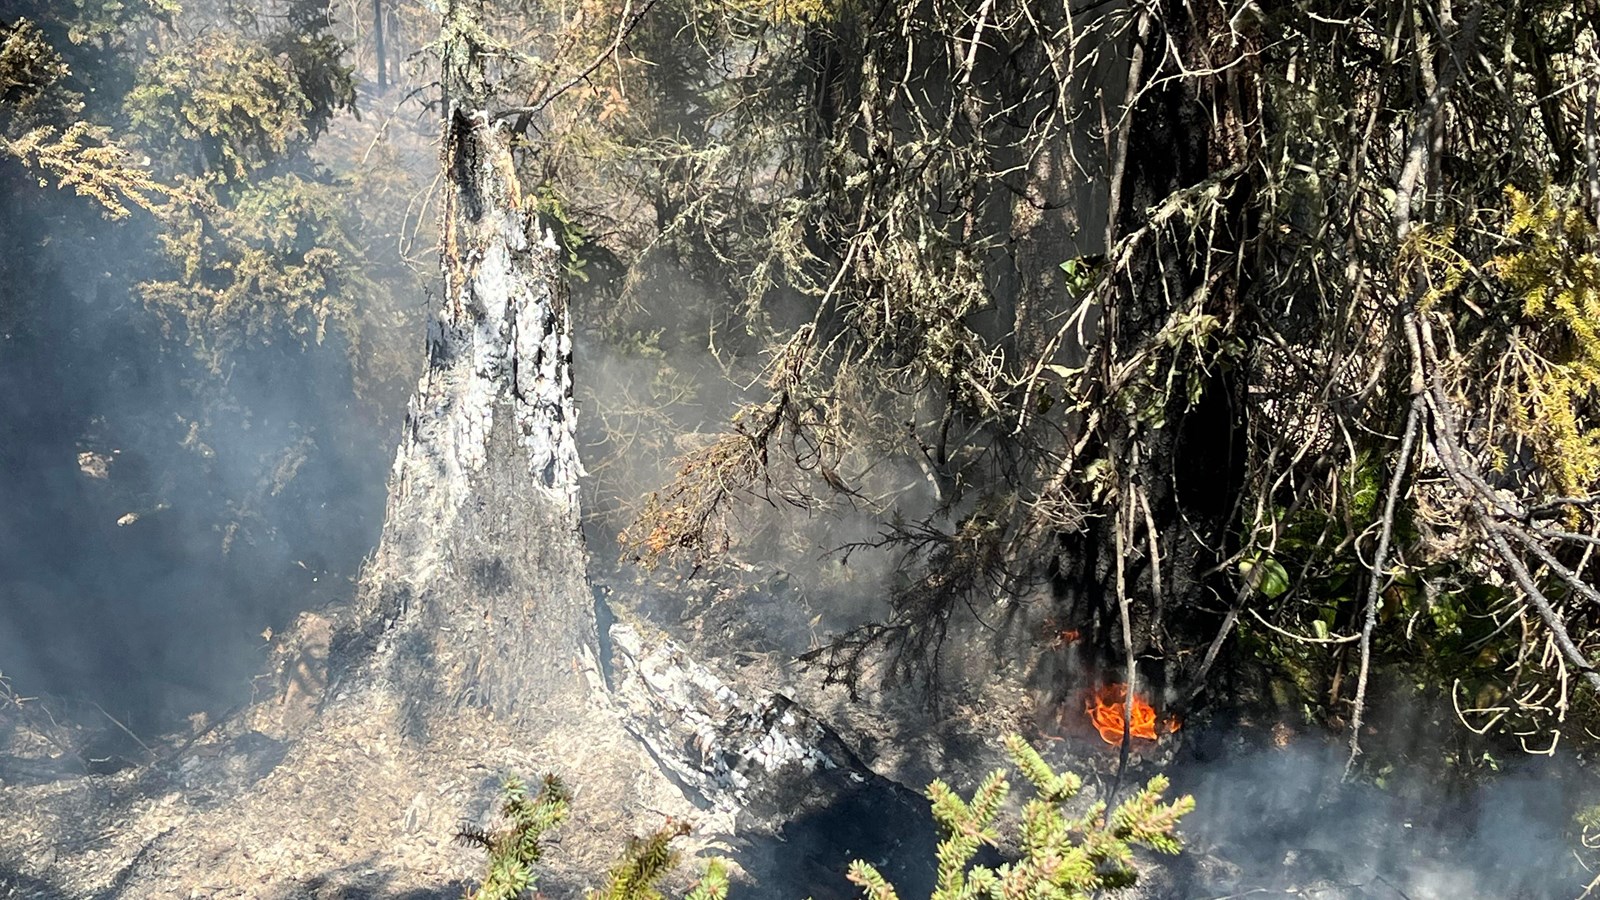 Small flames flare up at the base of a tree. Smoke surrounds a burnt tree snag.